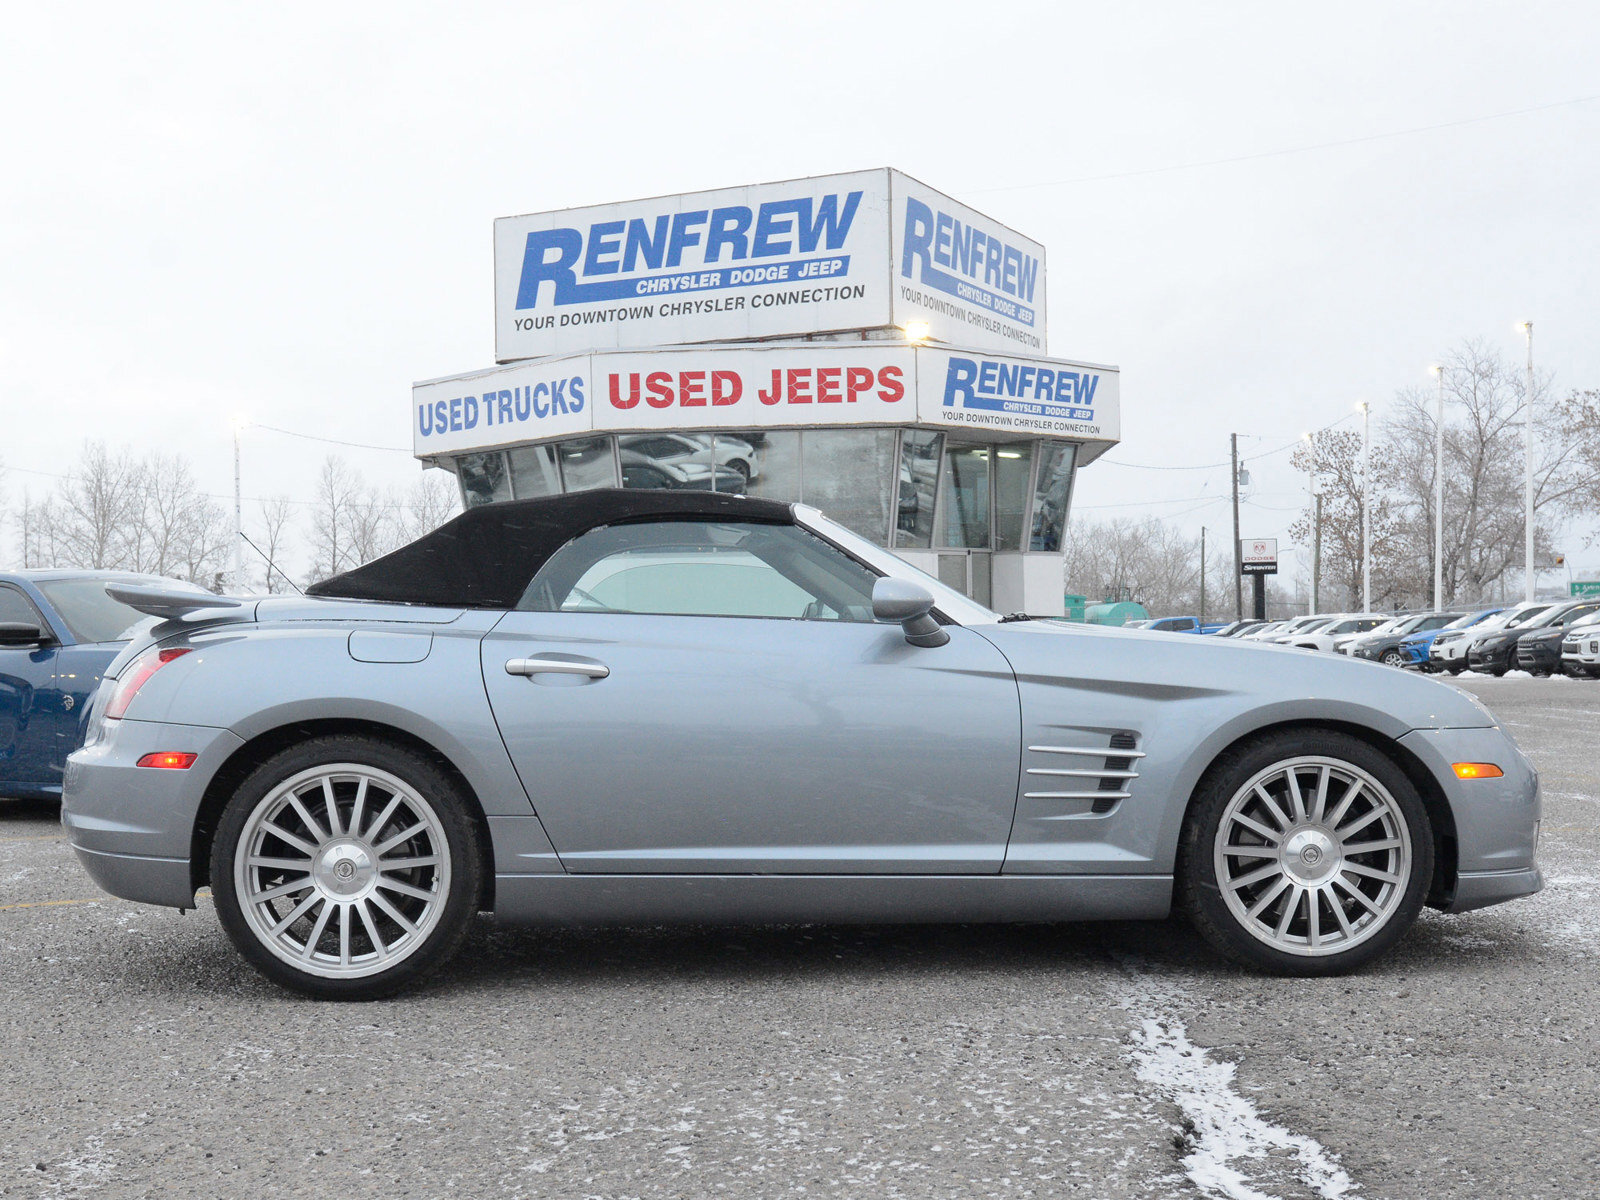 2005 Chrysler Crossfire SRT6 Roadster, VERY RARE!!! SUPERCHARGED!